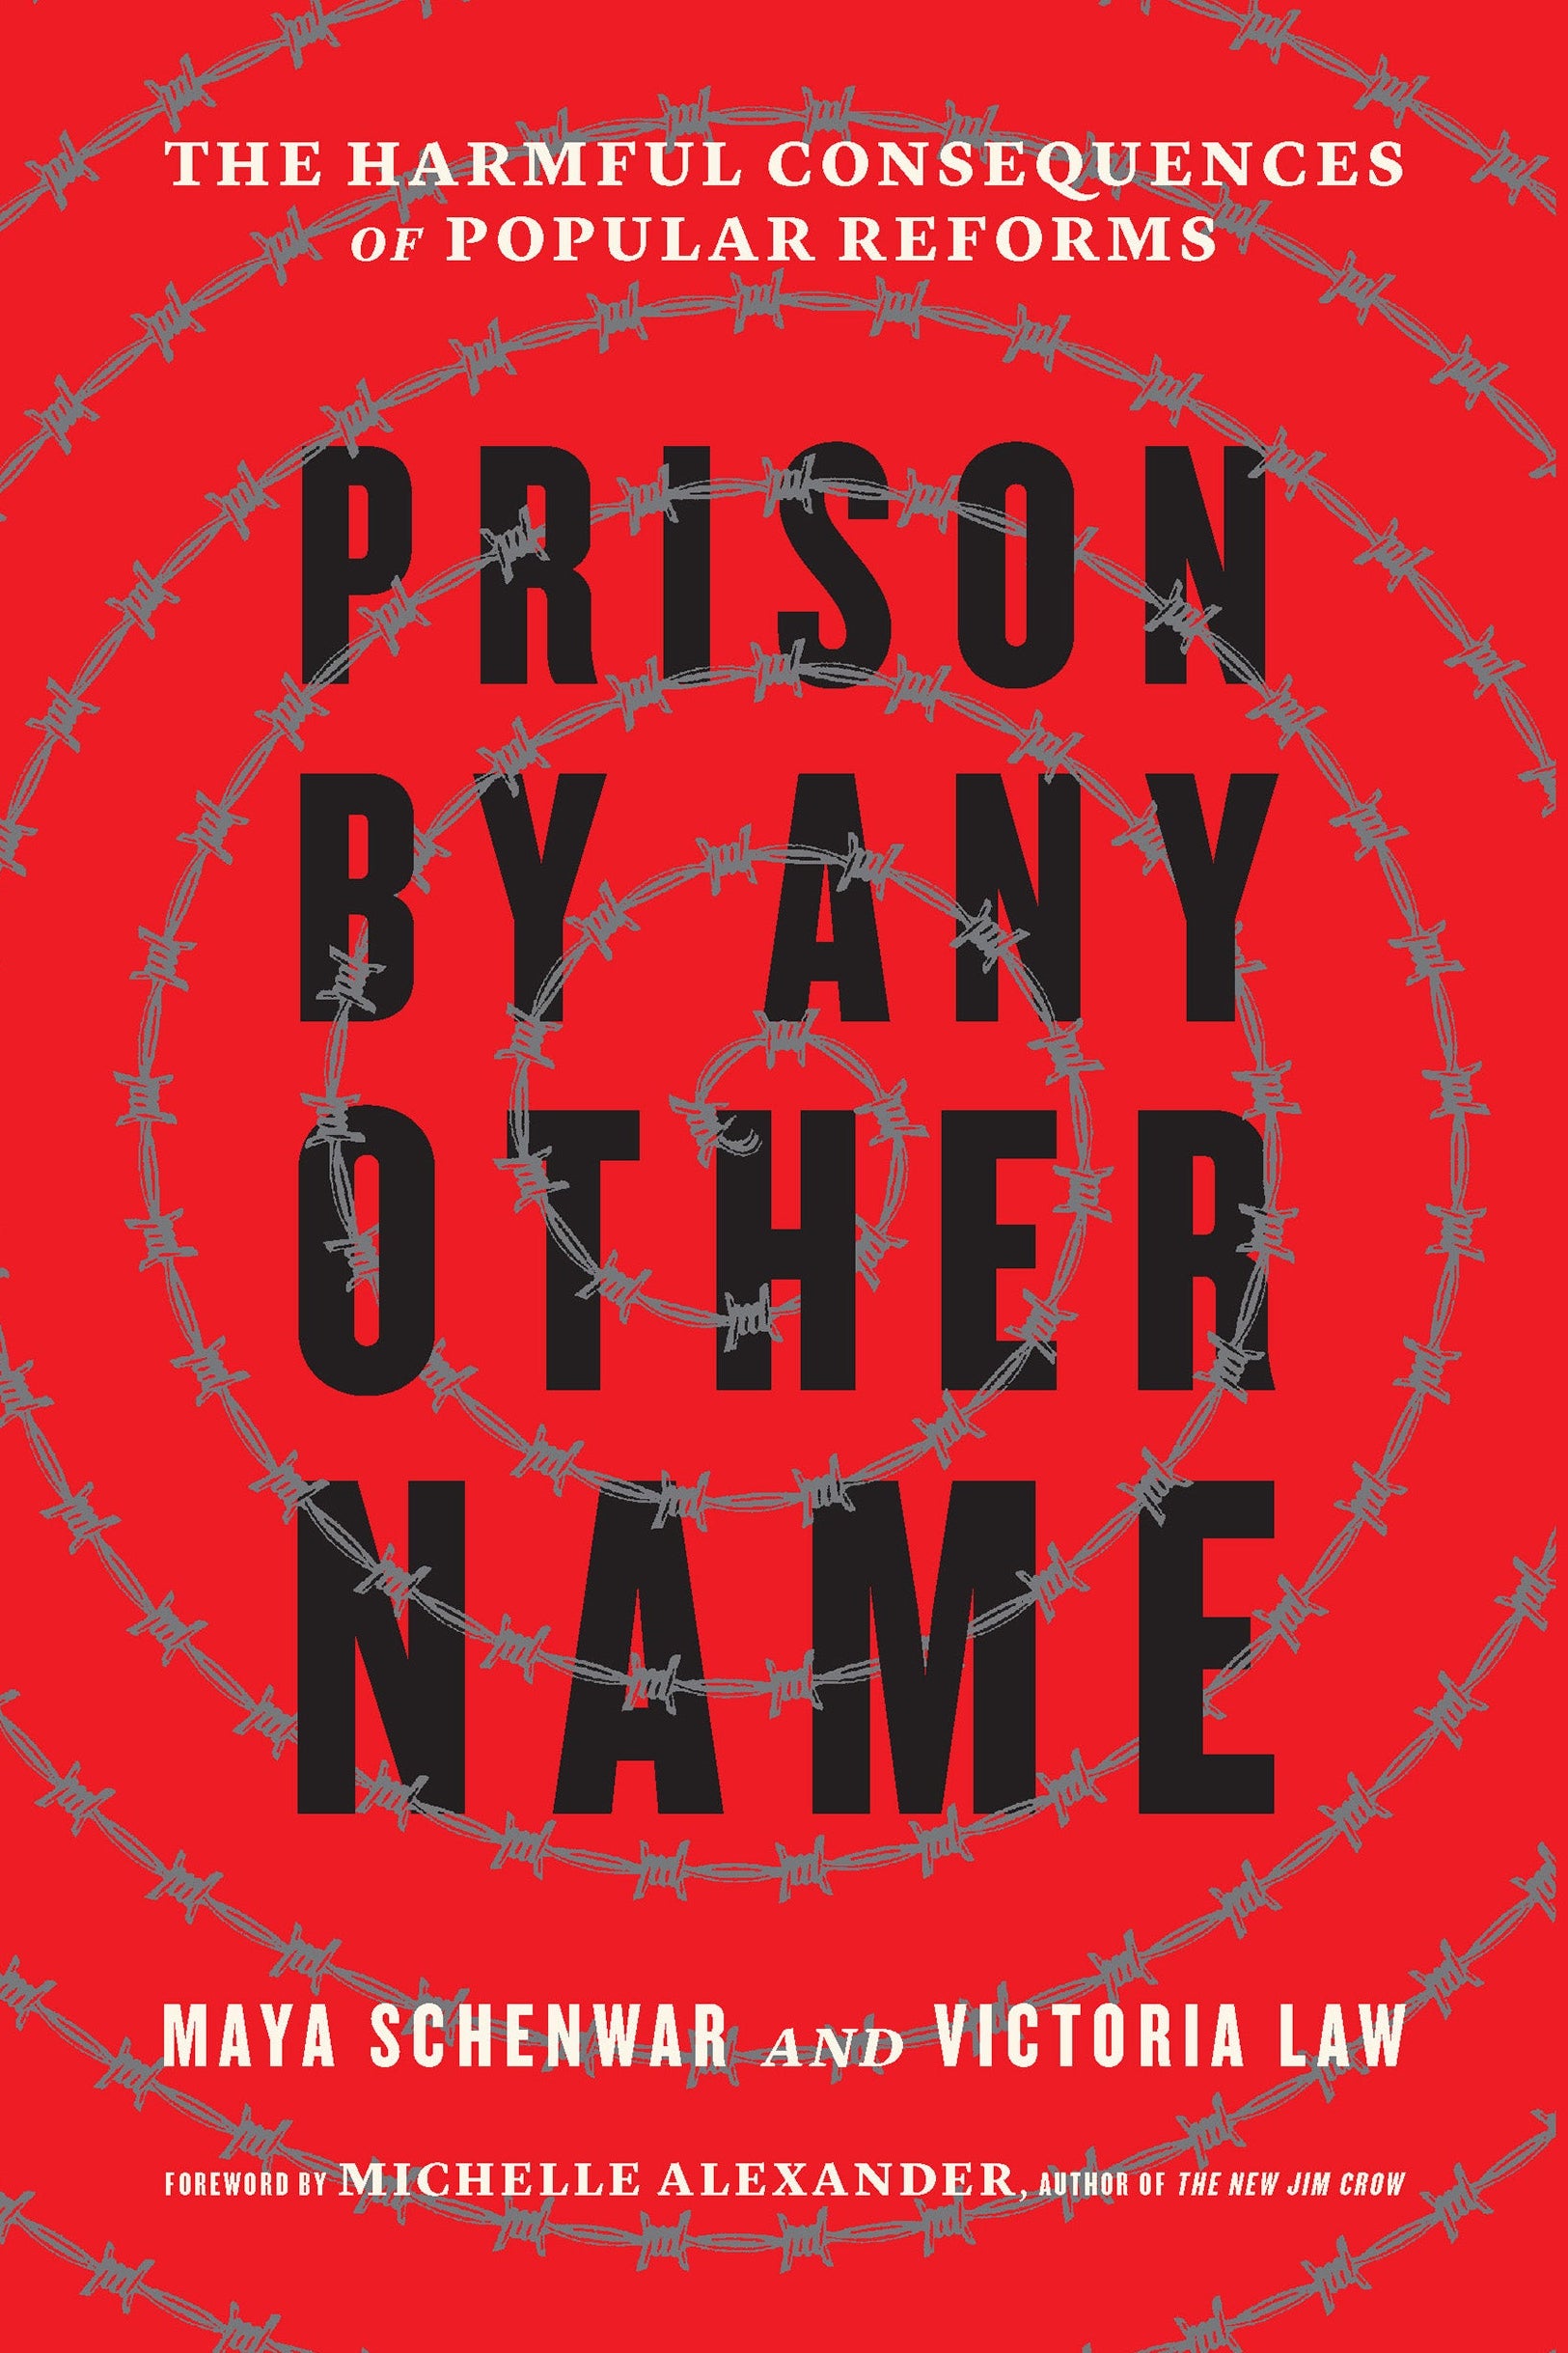 A red book cover with a barbed wire spiral over the words Prison By Any Other Name